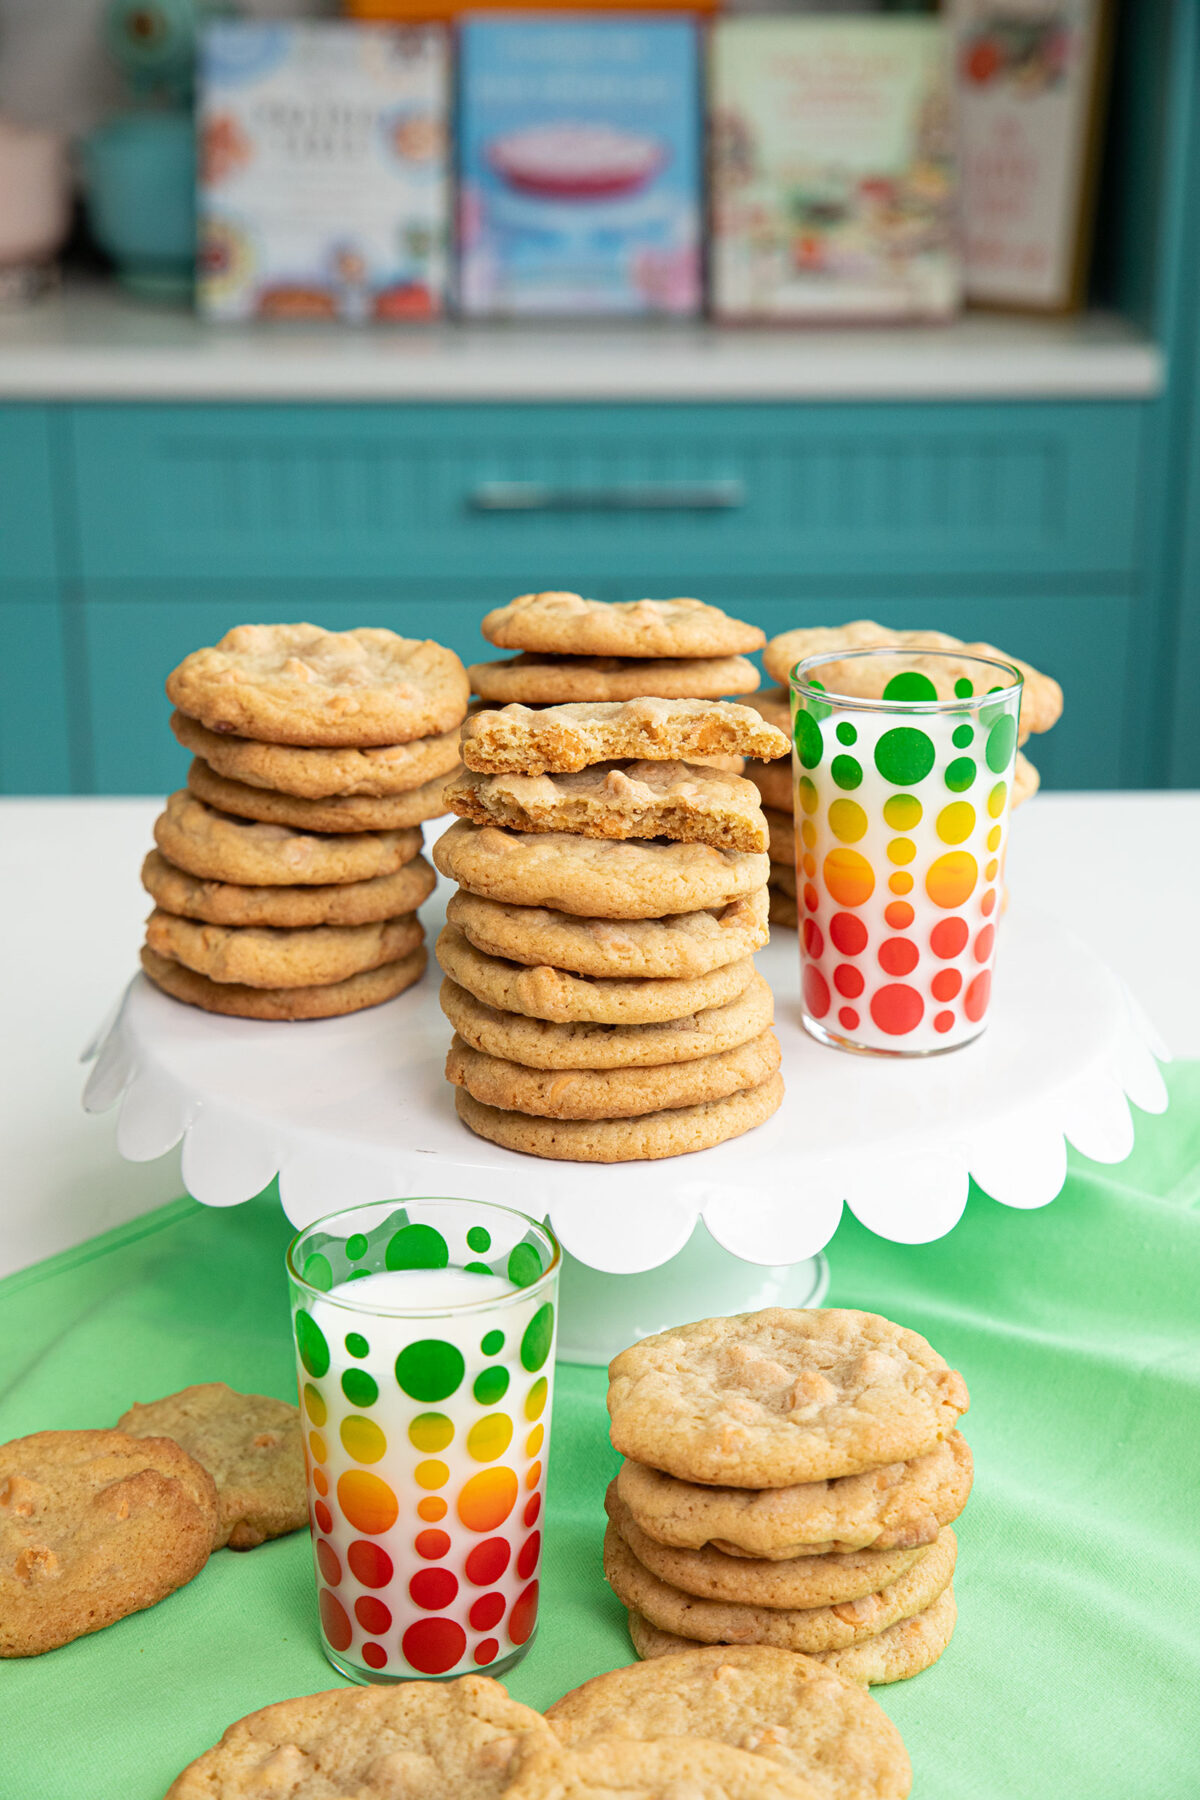 butterscotch cookies stacked in piles of 7 with glasses of milk beside them.